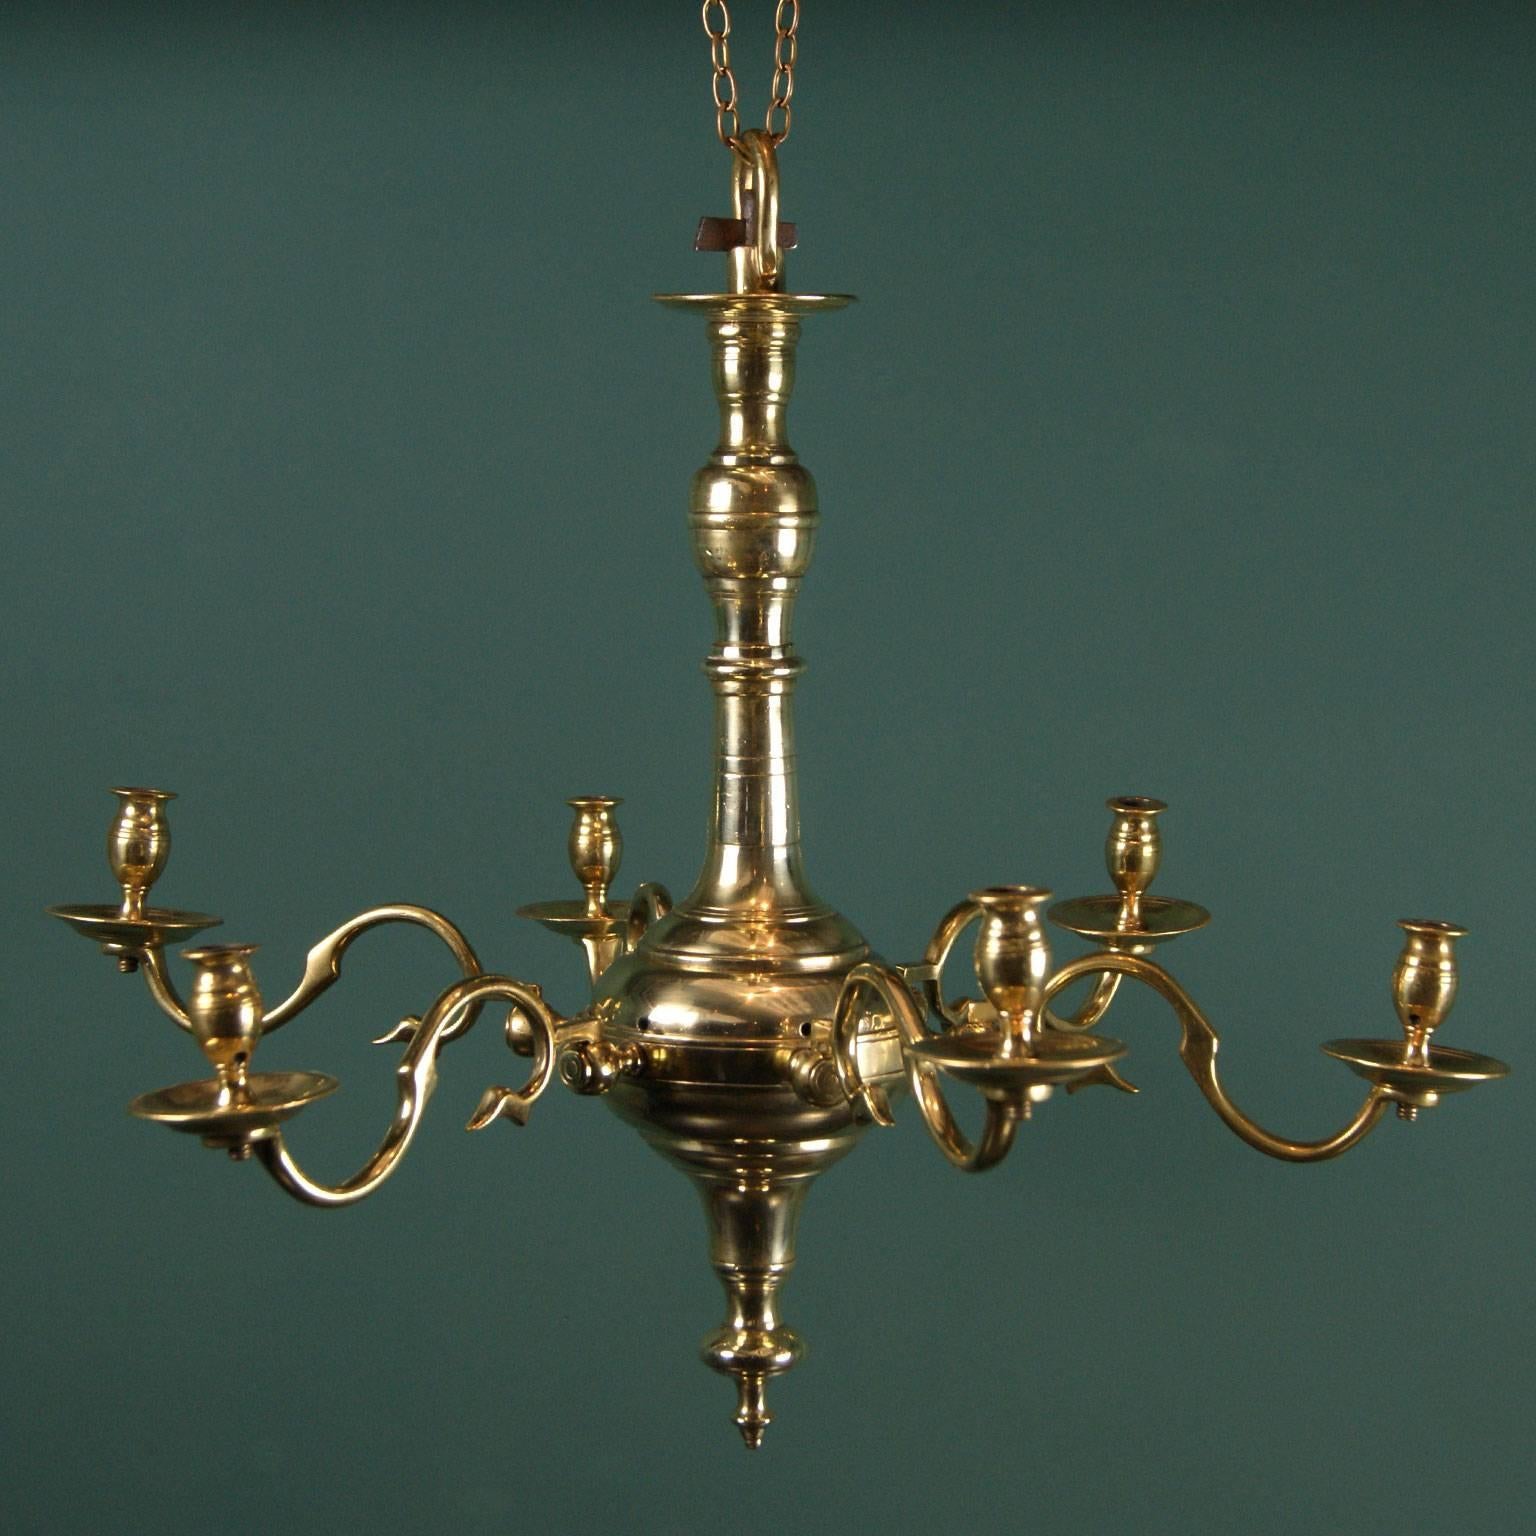 English Mid-18th Century Brass Chandelier For Sale 4